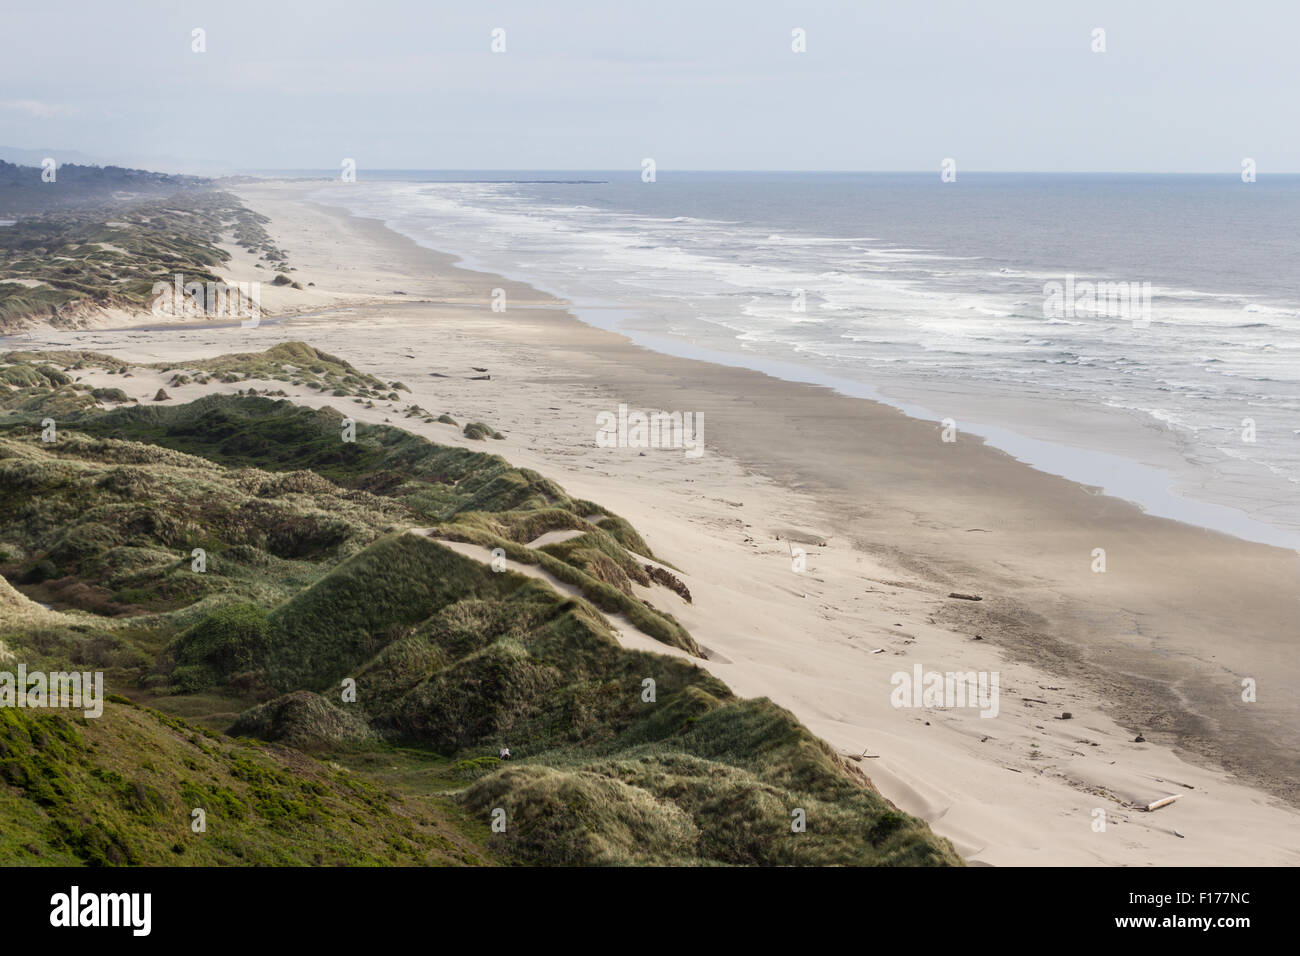 natural landscape in Central Oregon coast with beach, sand dunes and an overcast sky Stock Photo